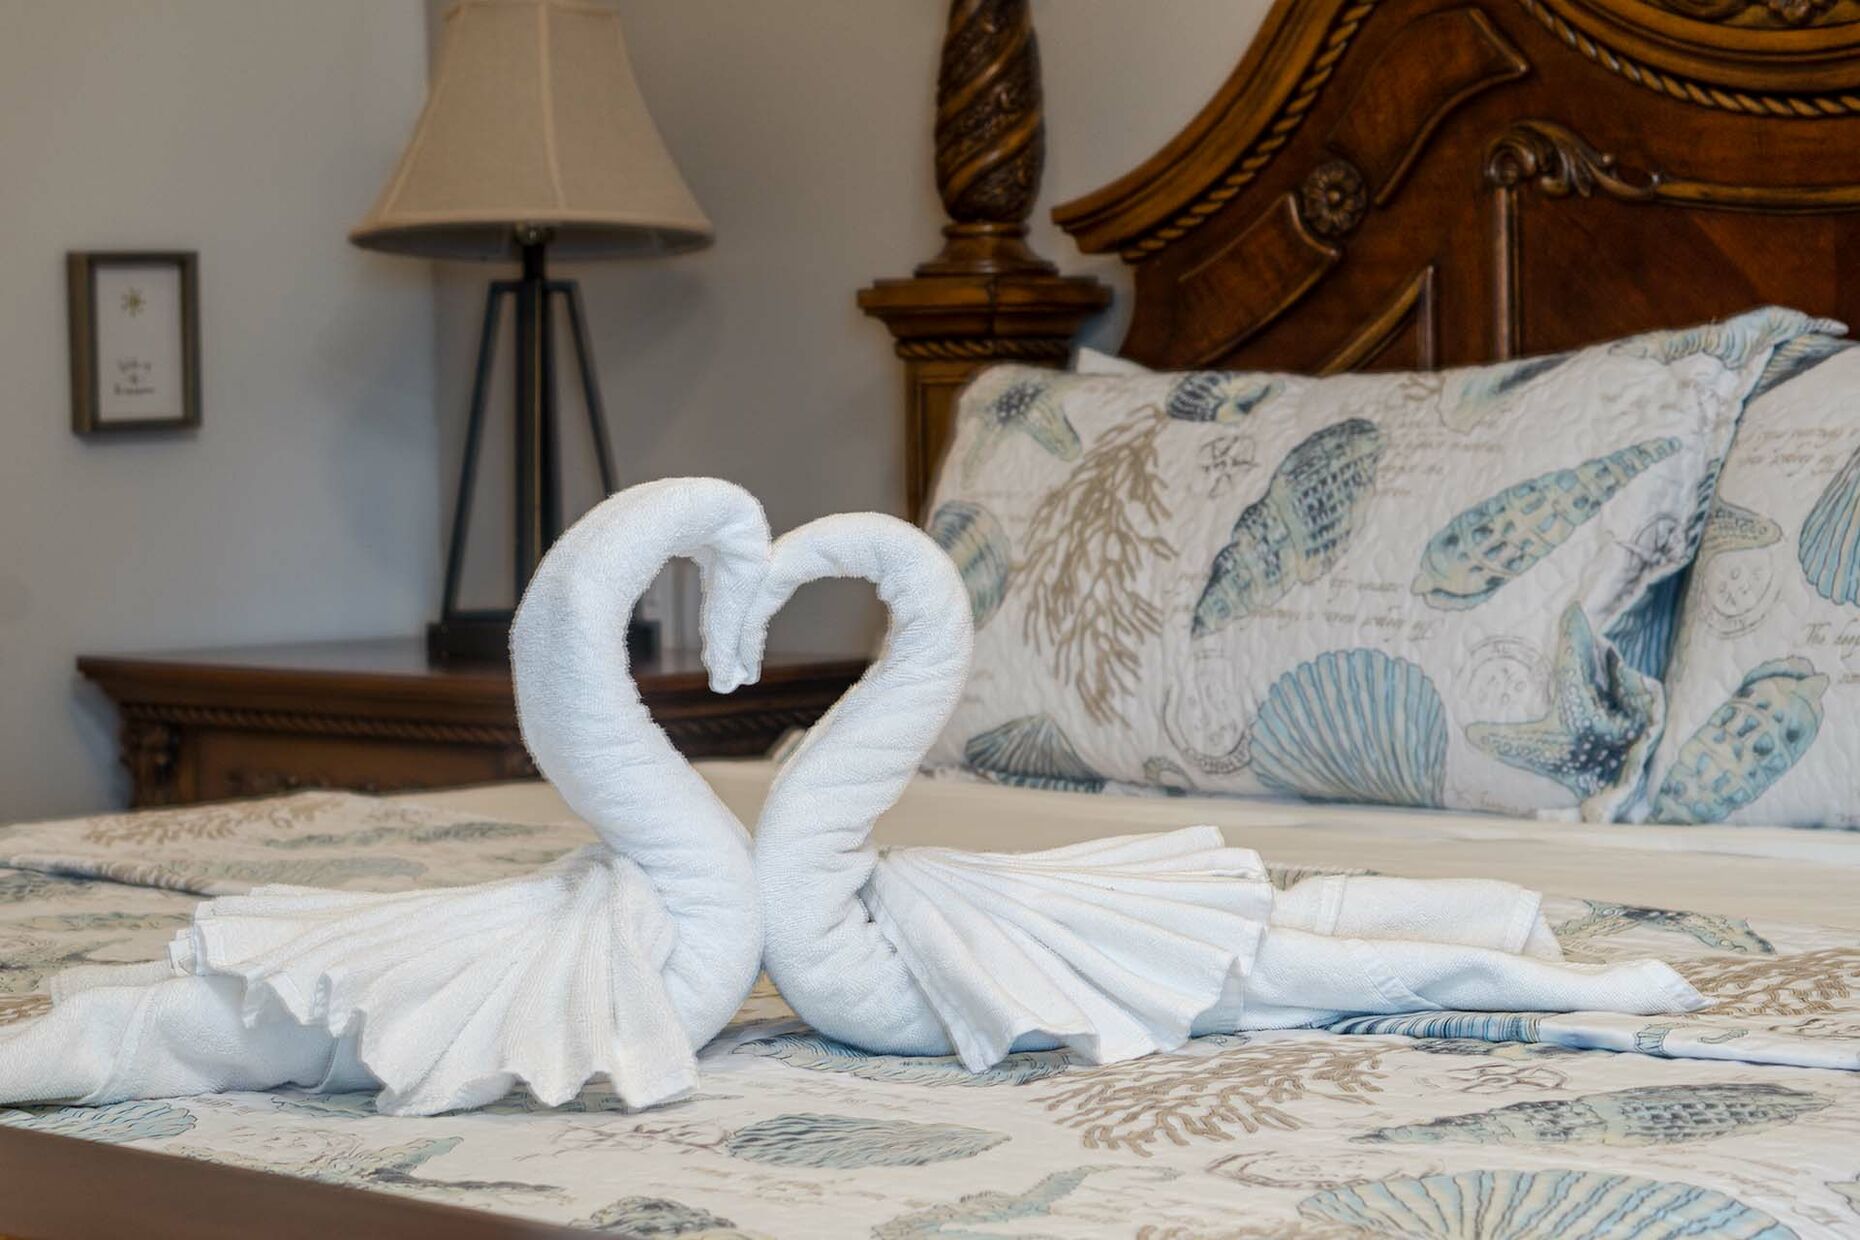 Swans wait for you in the Master bedroom.